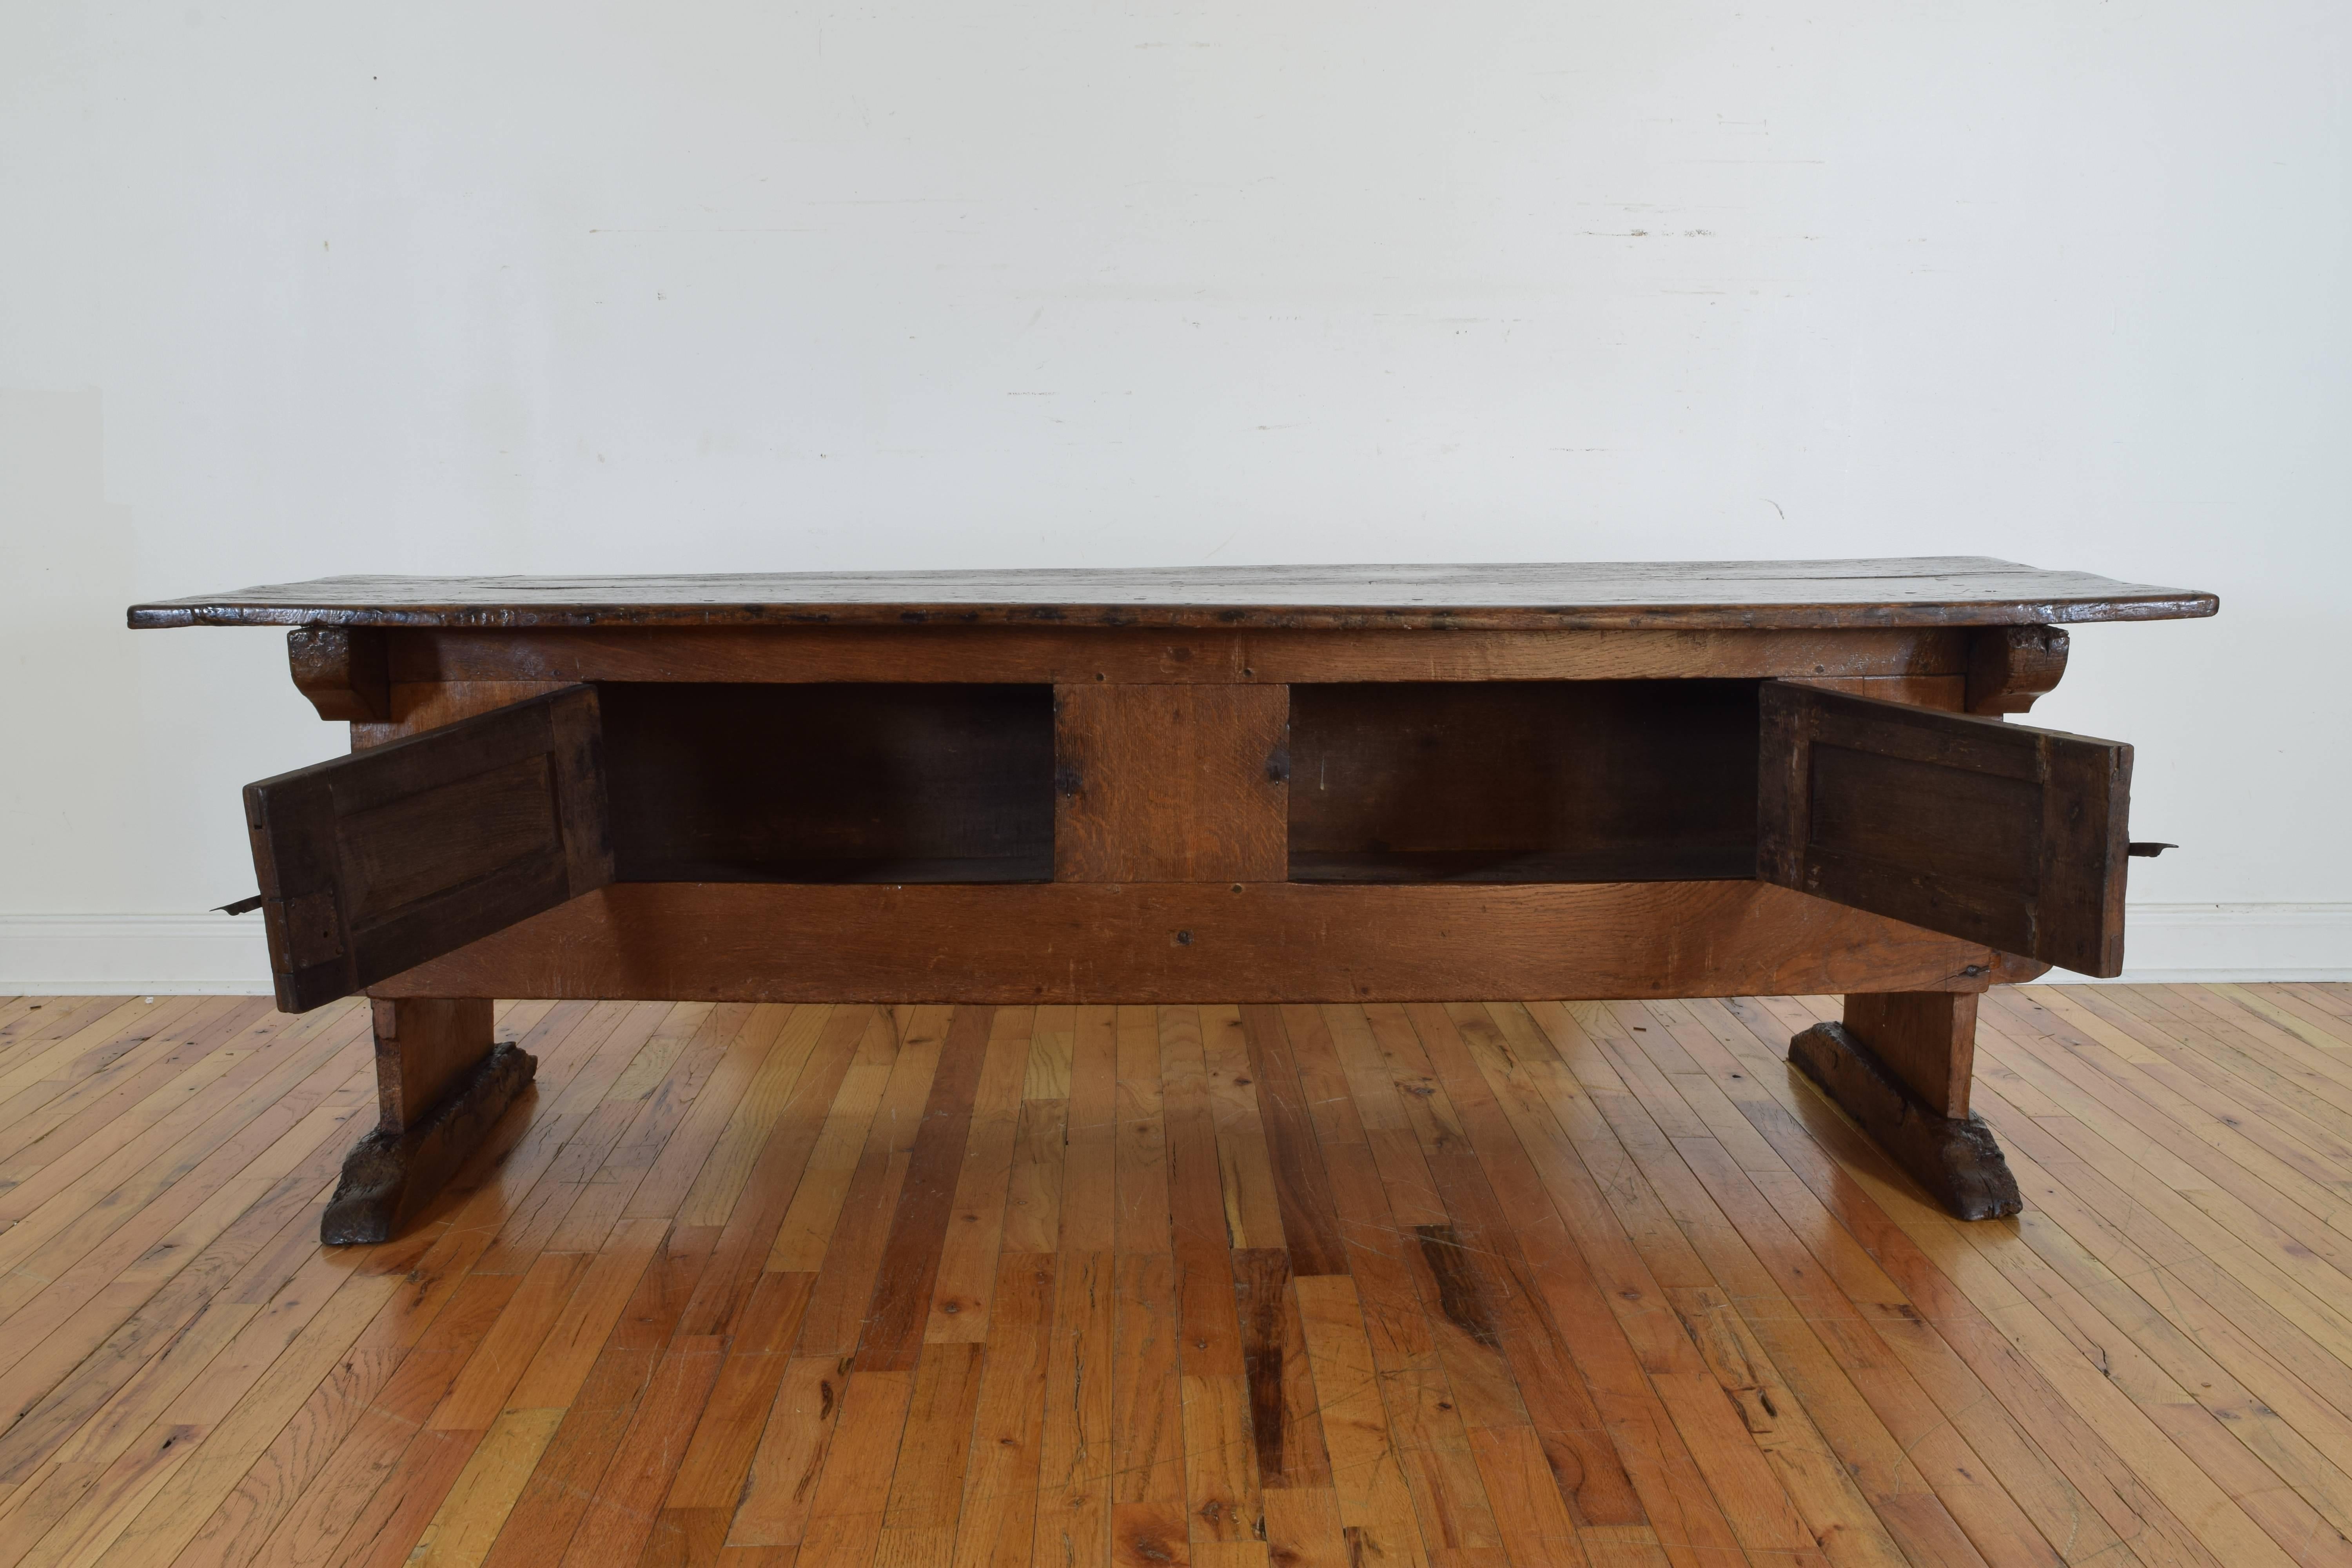 Hand-Carved Unusual Swiss Oak Rustic Table with Hinged Doors, 17th-18th Century